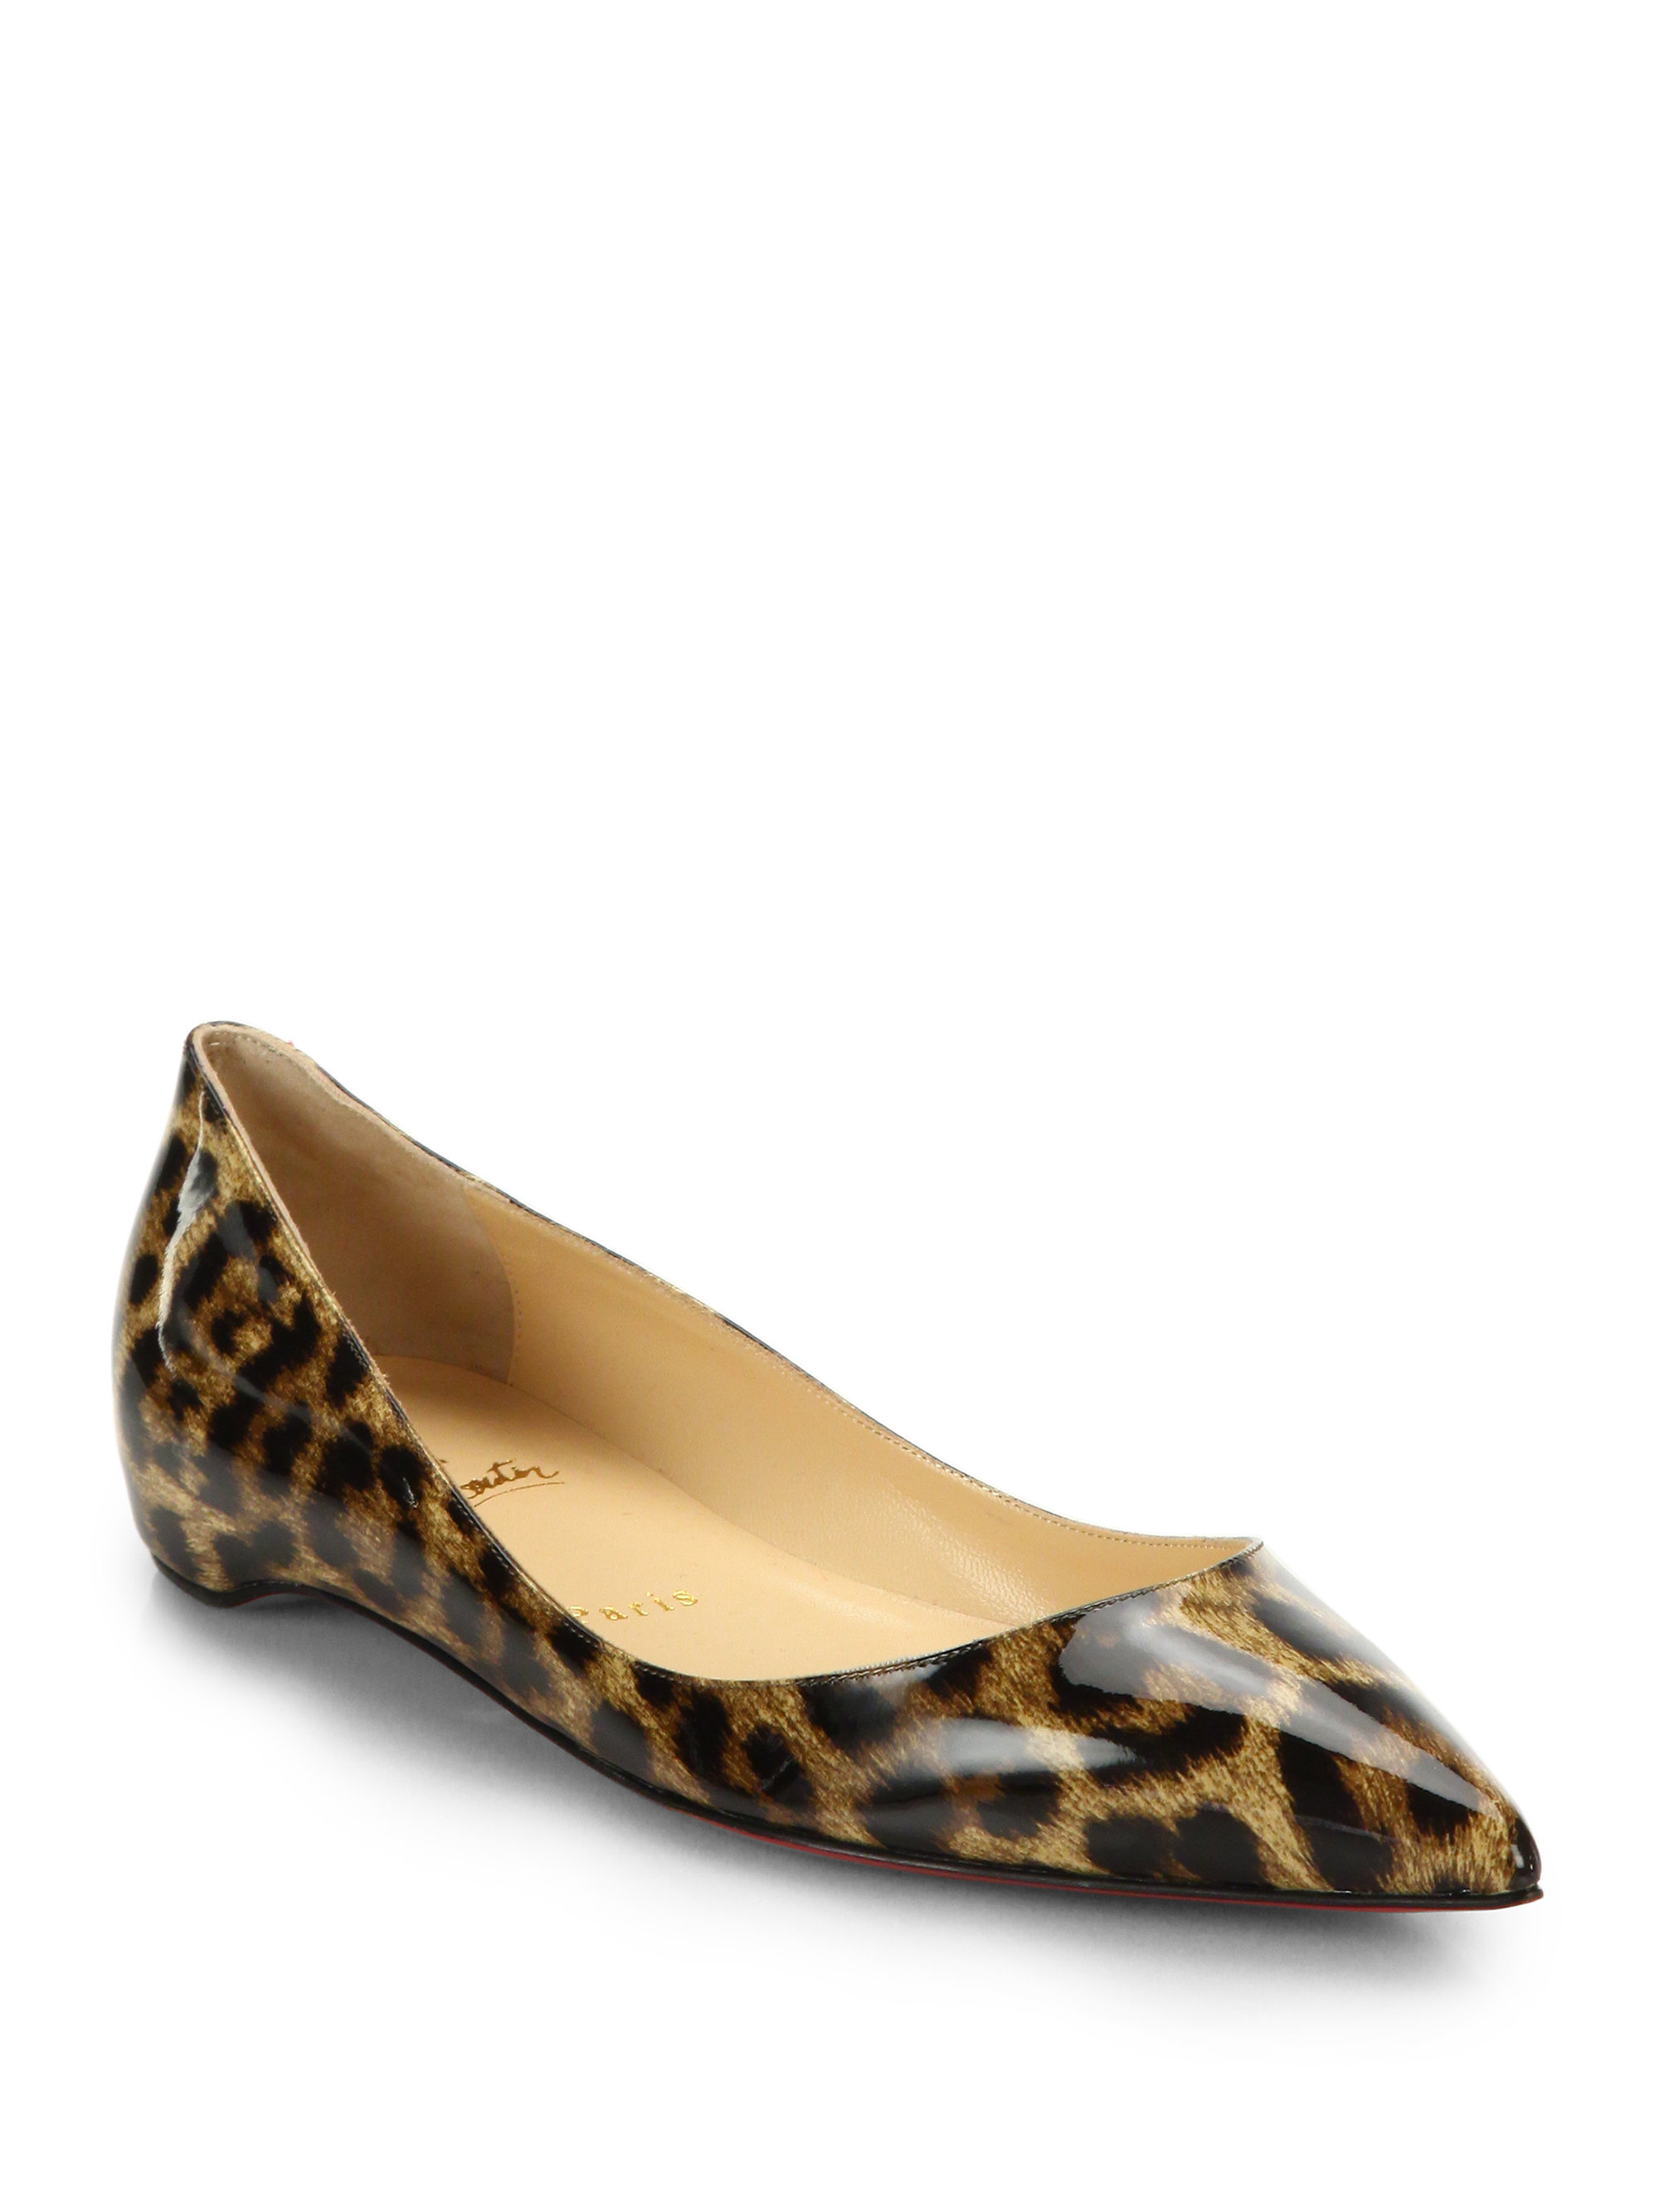 Christian louboutin Leopard Print Patent Leather Point-Toe Flats ...  